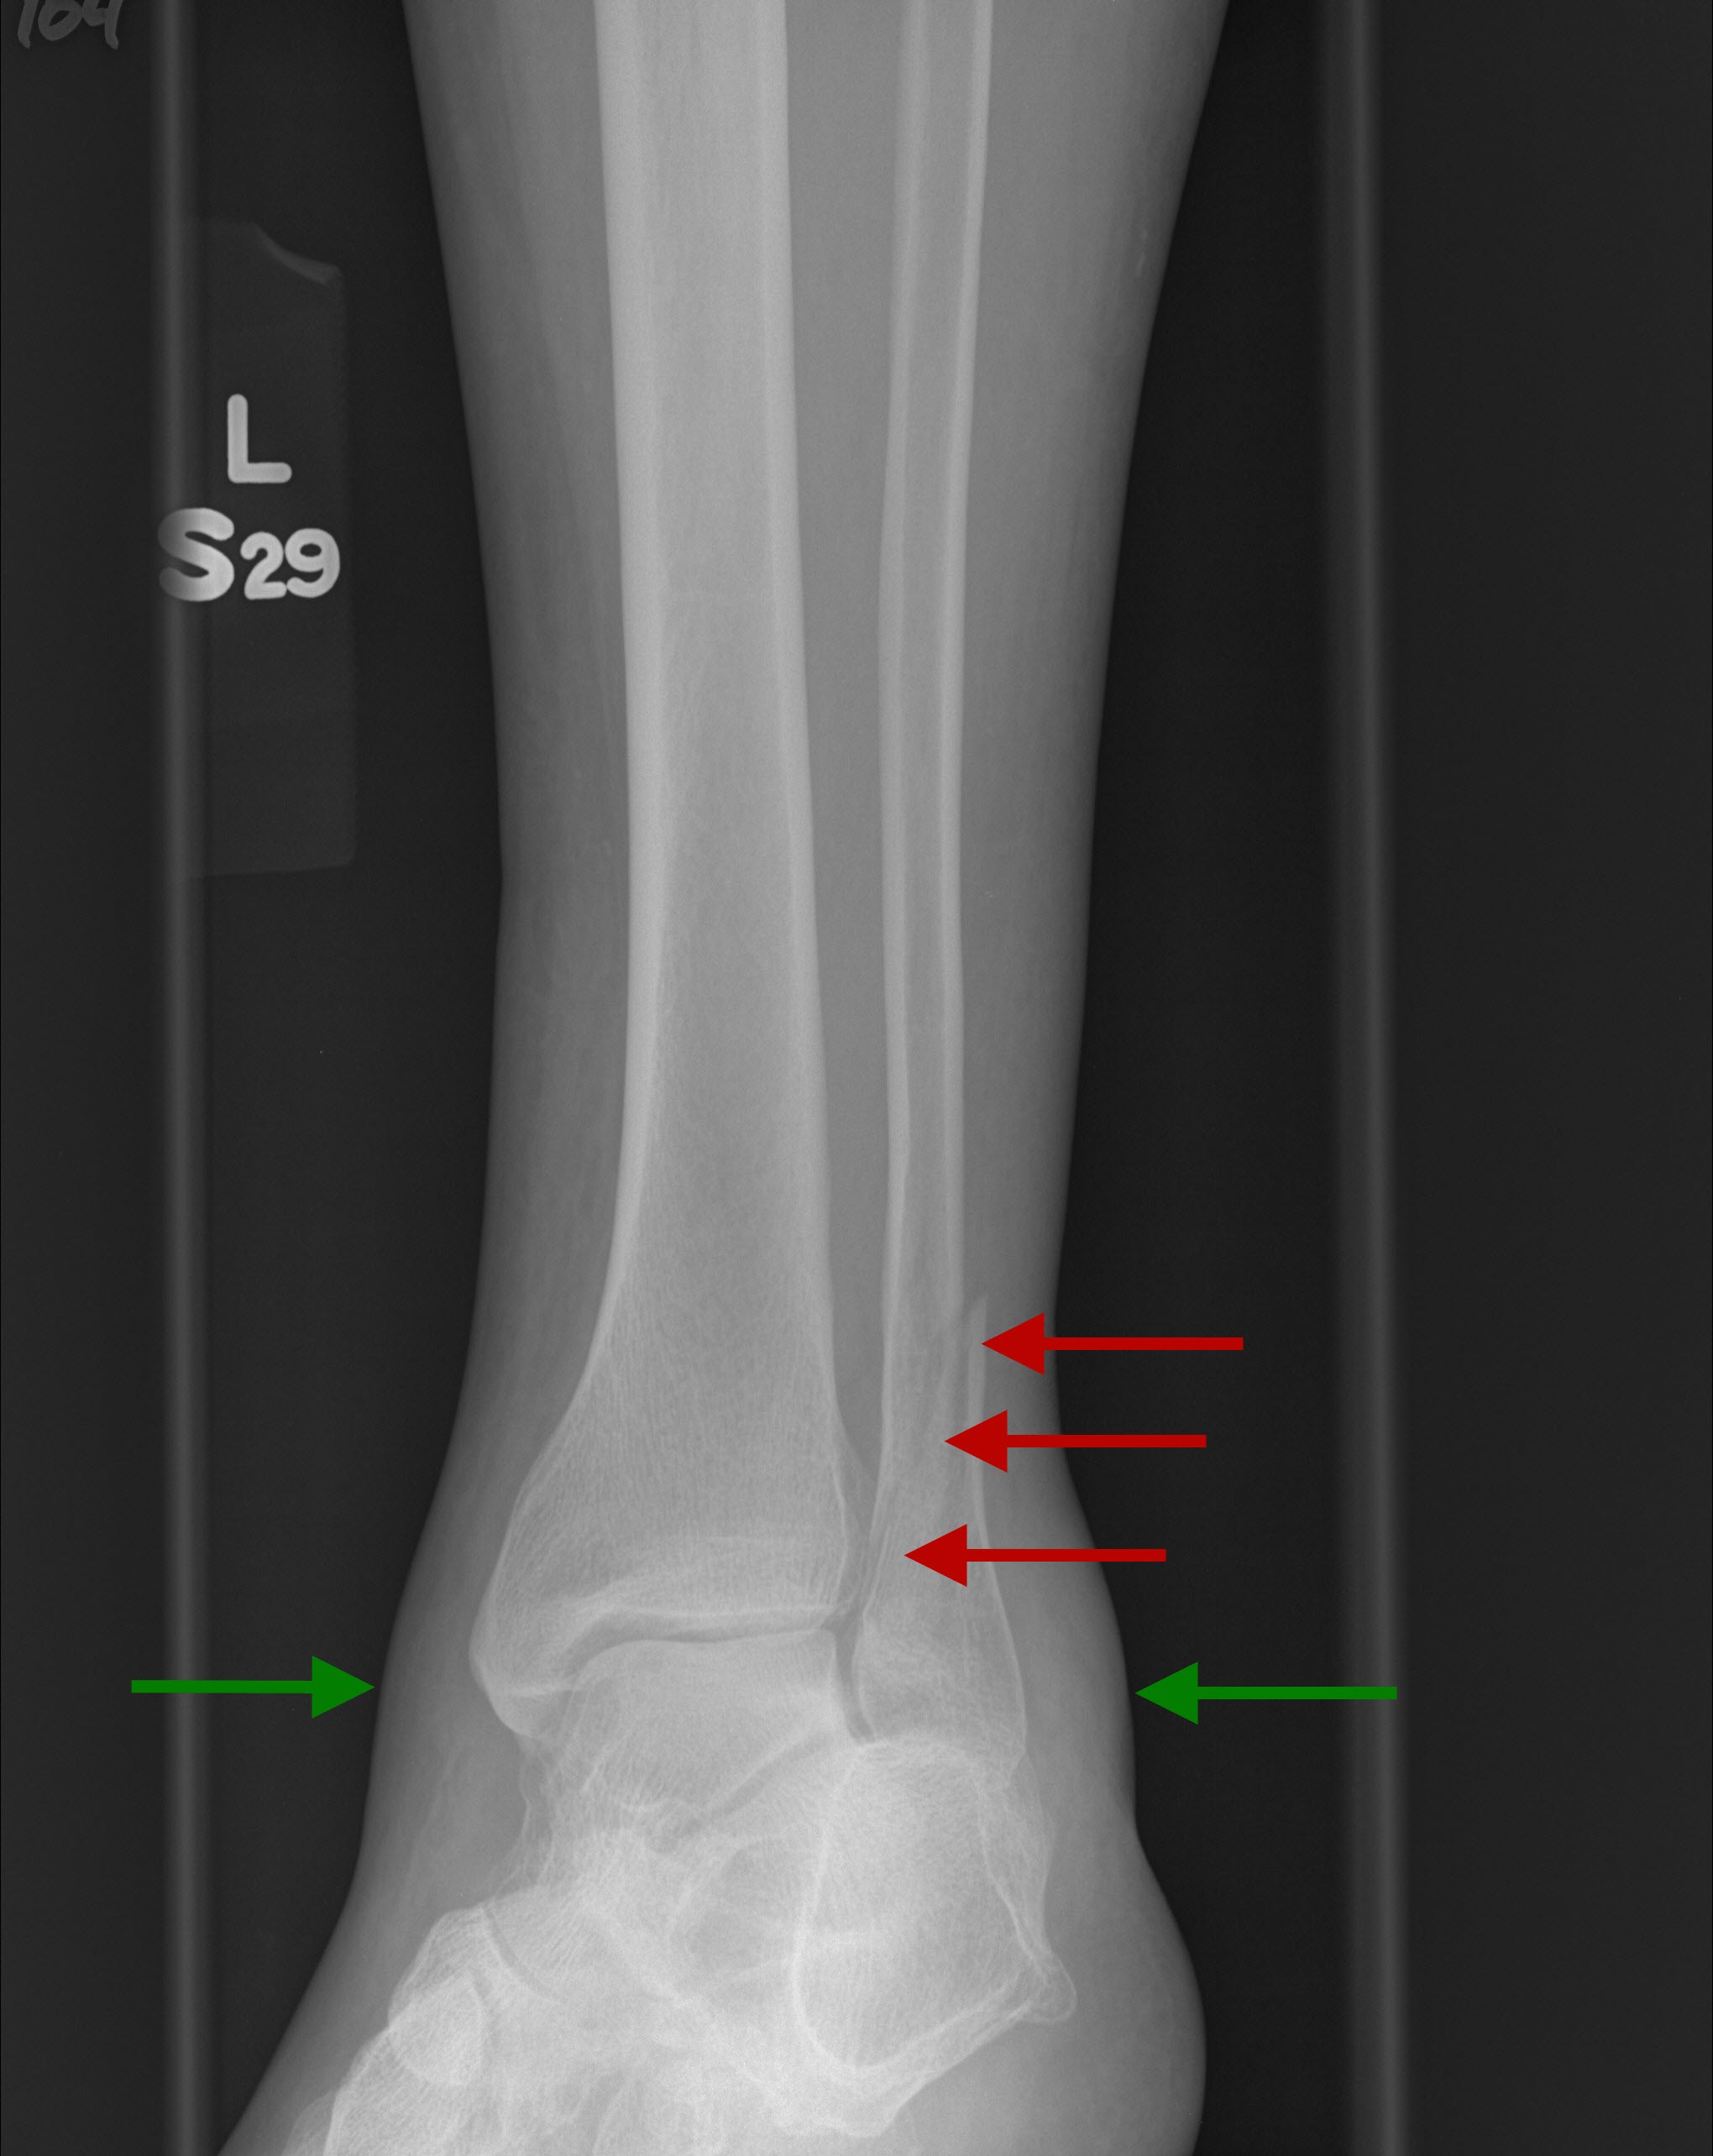 What is an isolated distal fibula fracture?